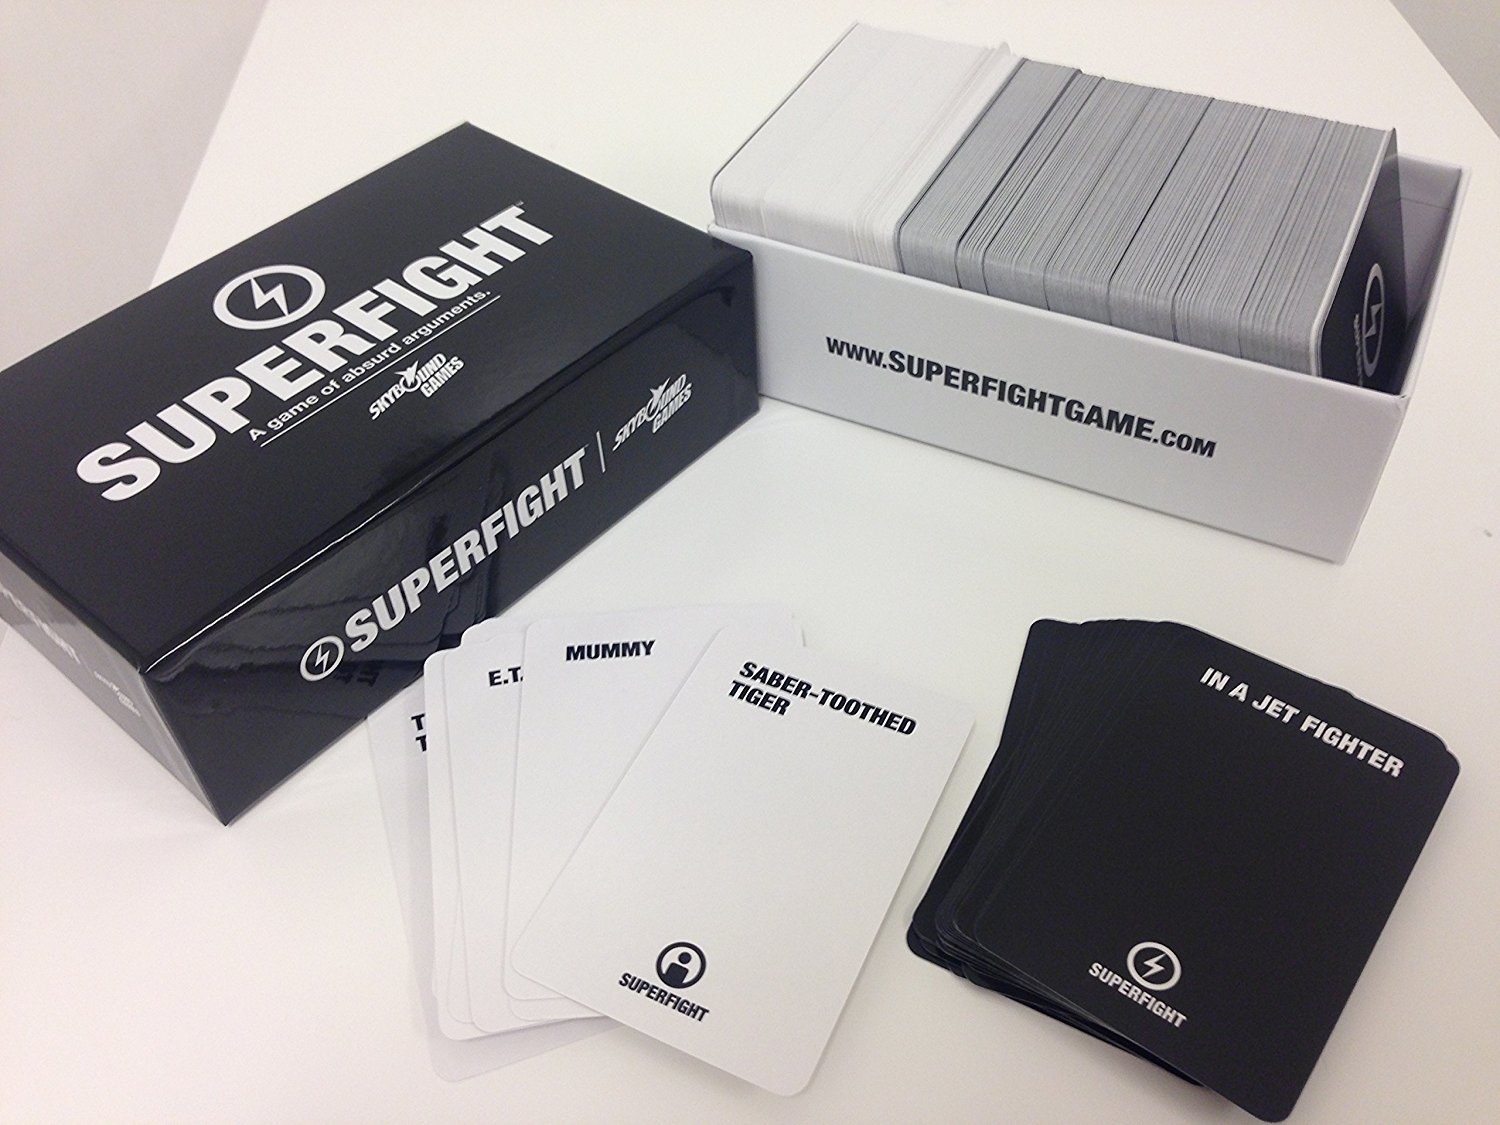 Superfight game box with cards displayed 